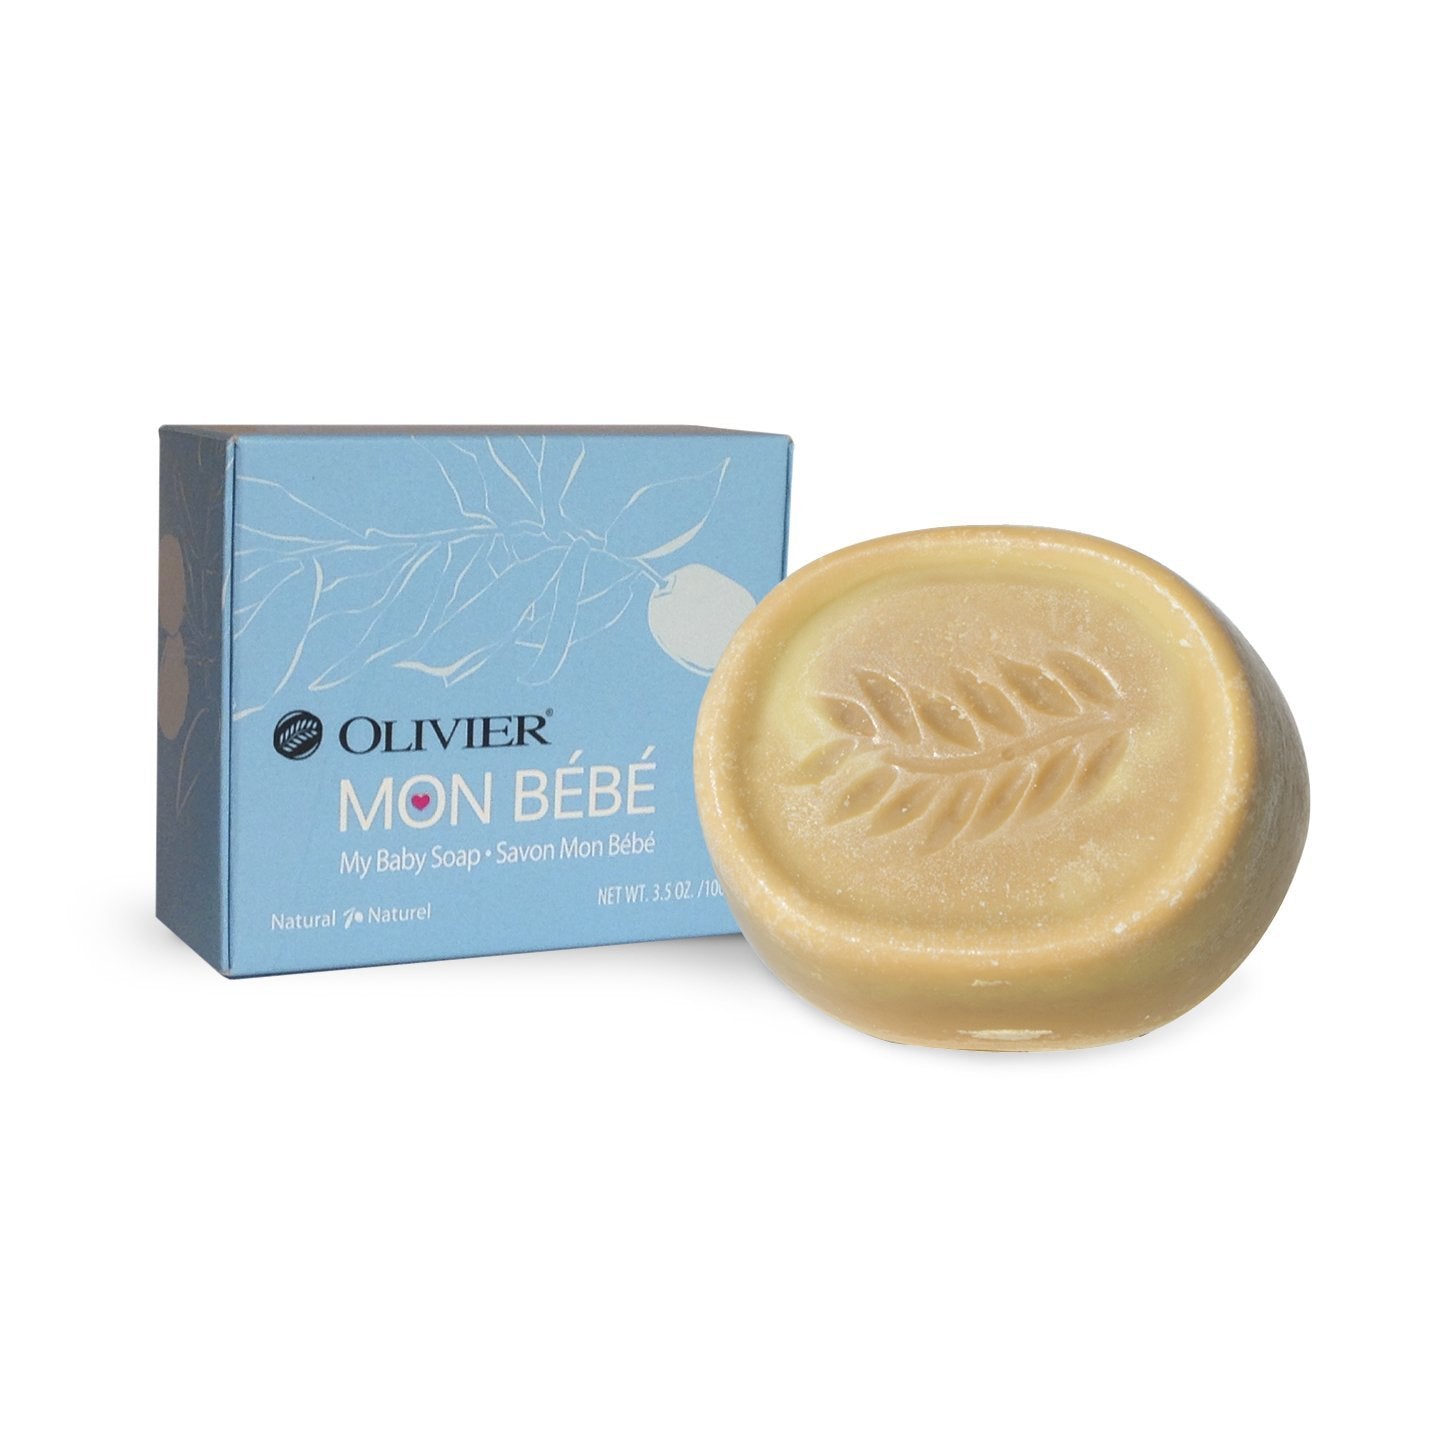 Baby Soap Bar by Olivier